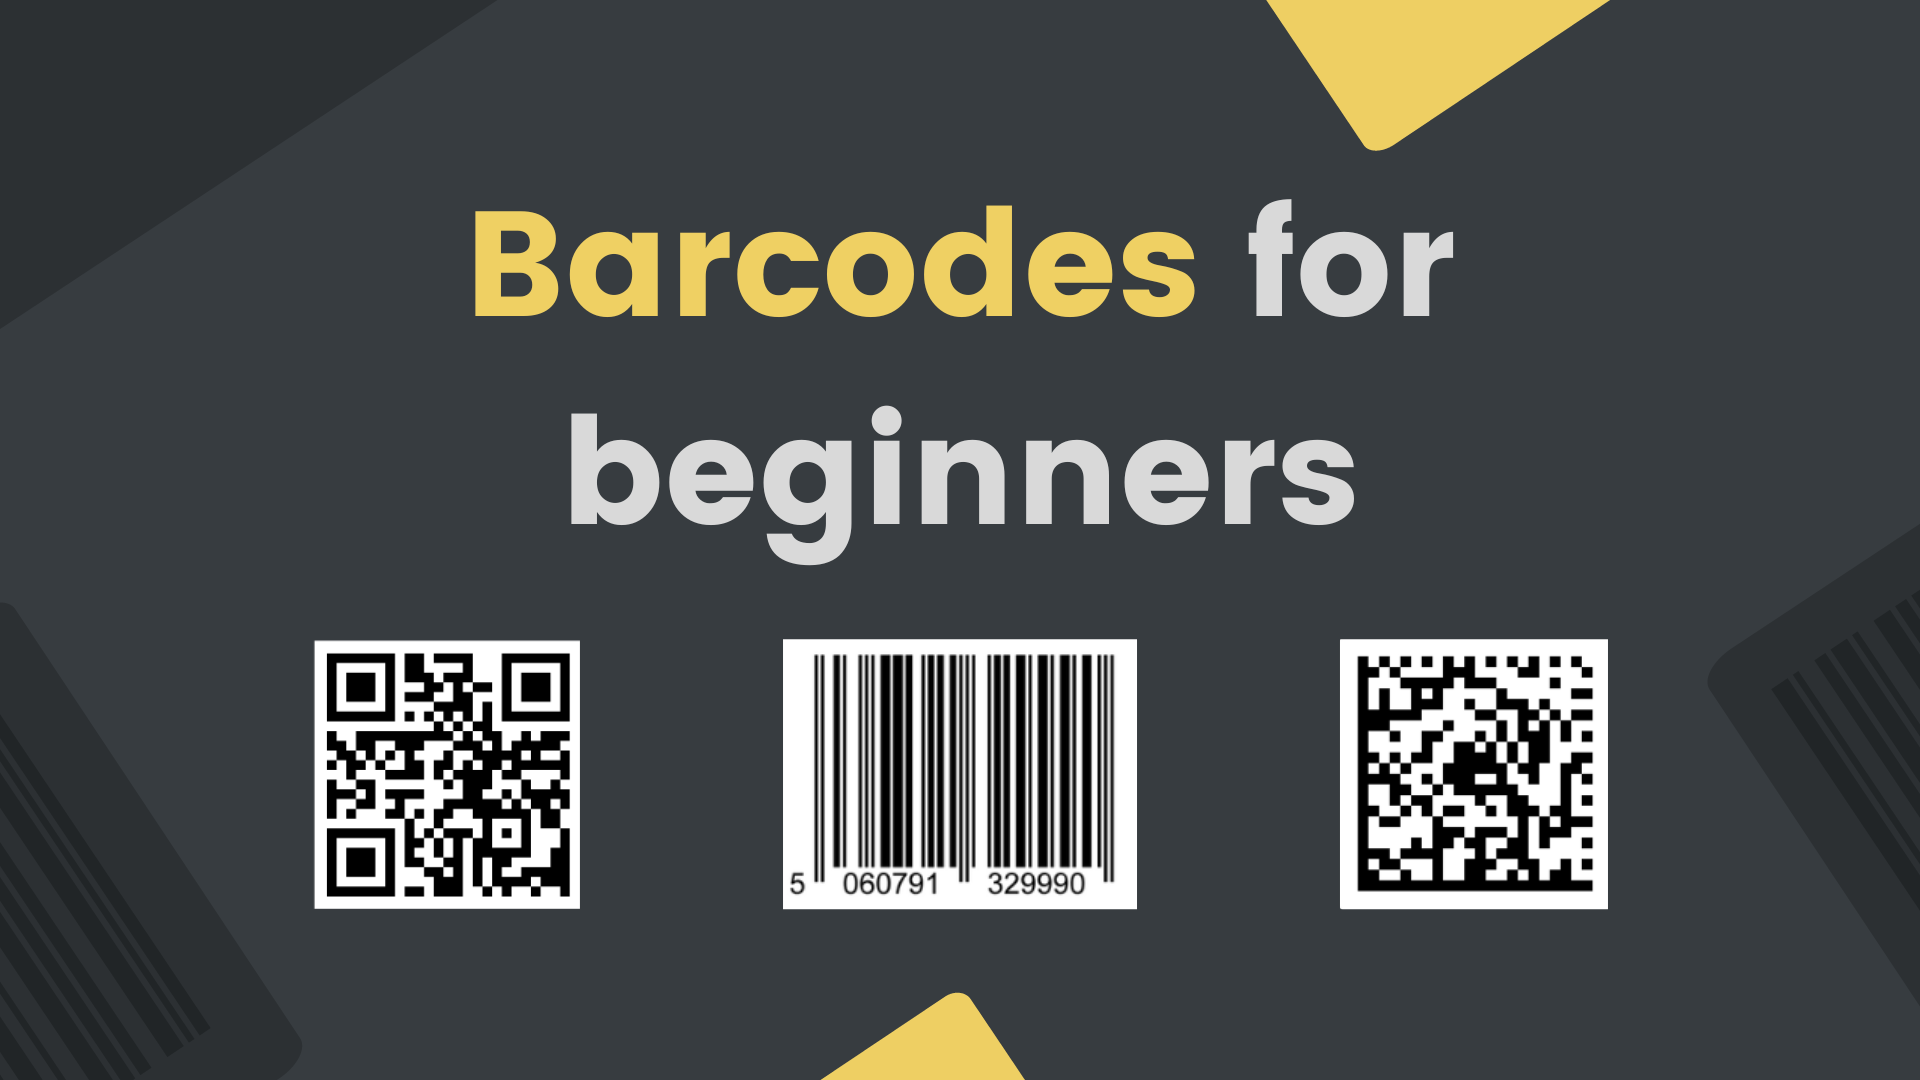 Learn everything there is to know about barcodes